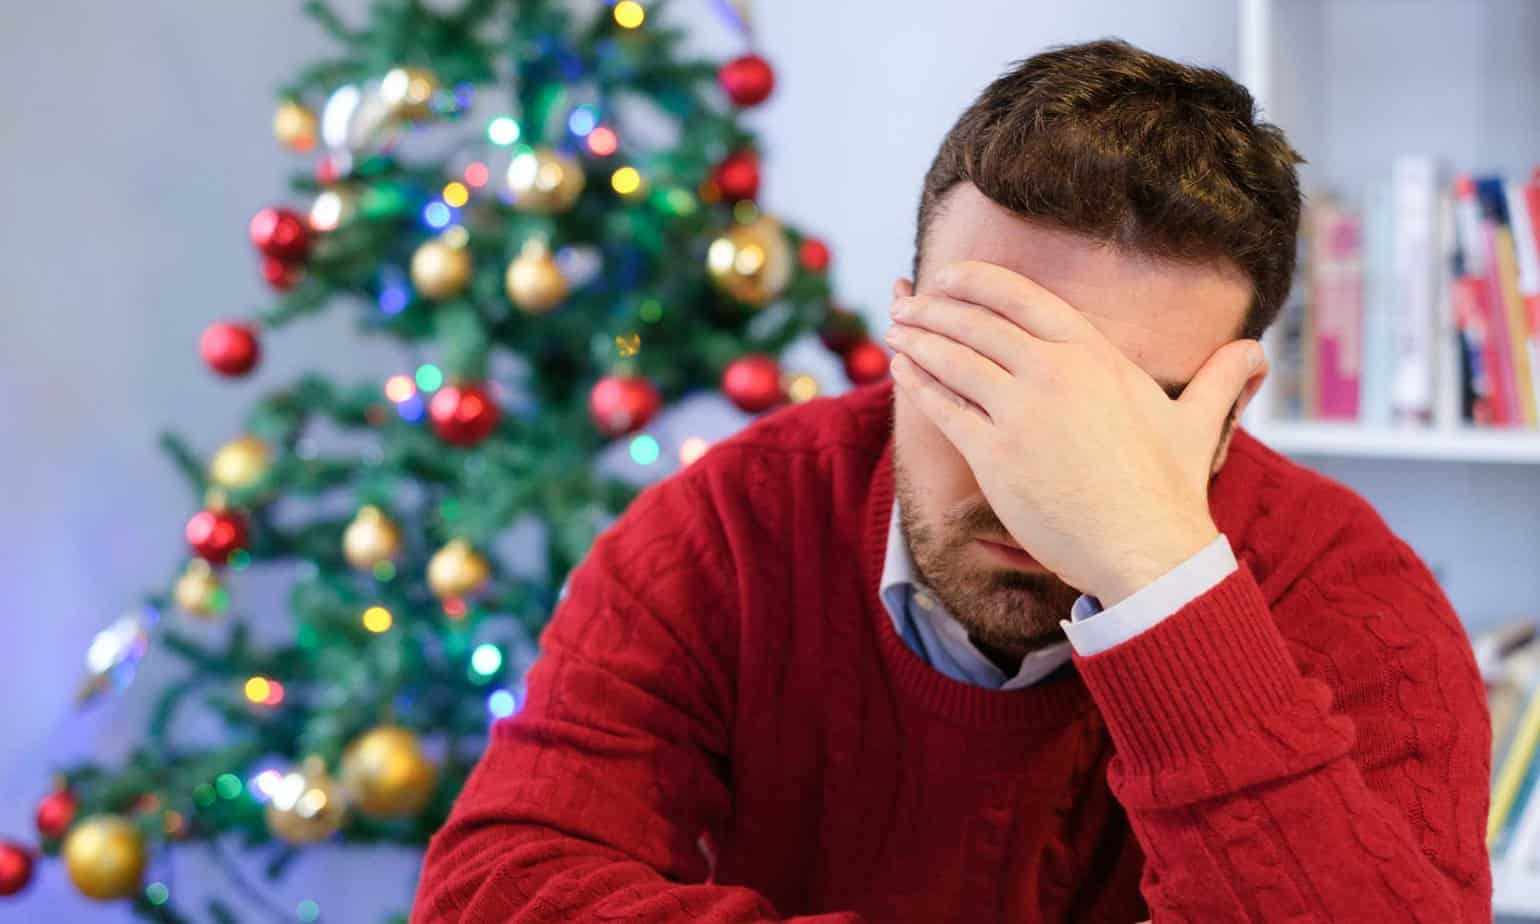 Man stressing over the holidays with hand on head and Christmas tree in the background